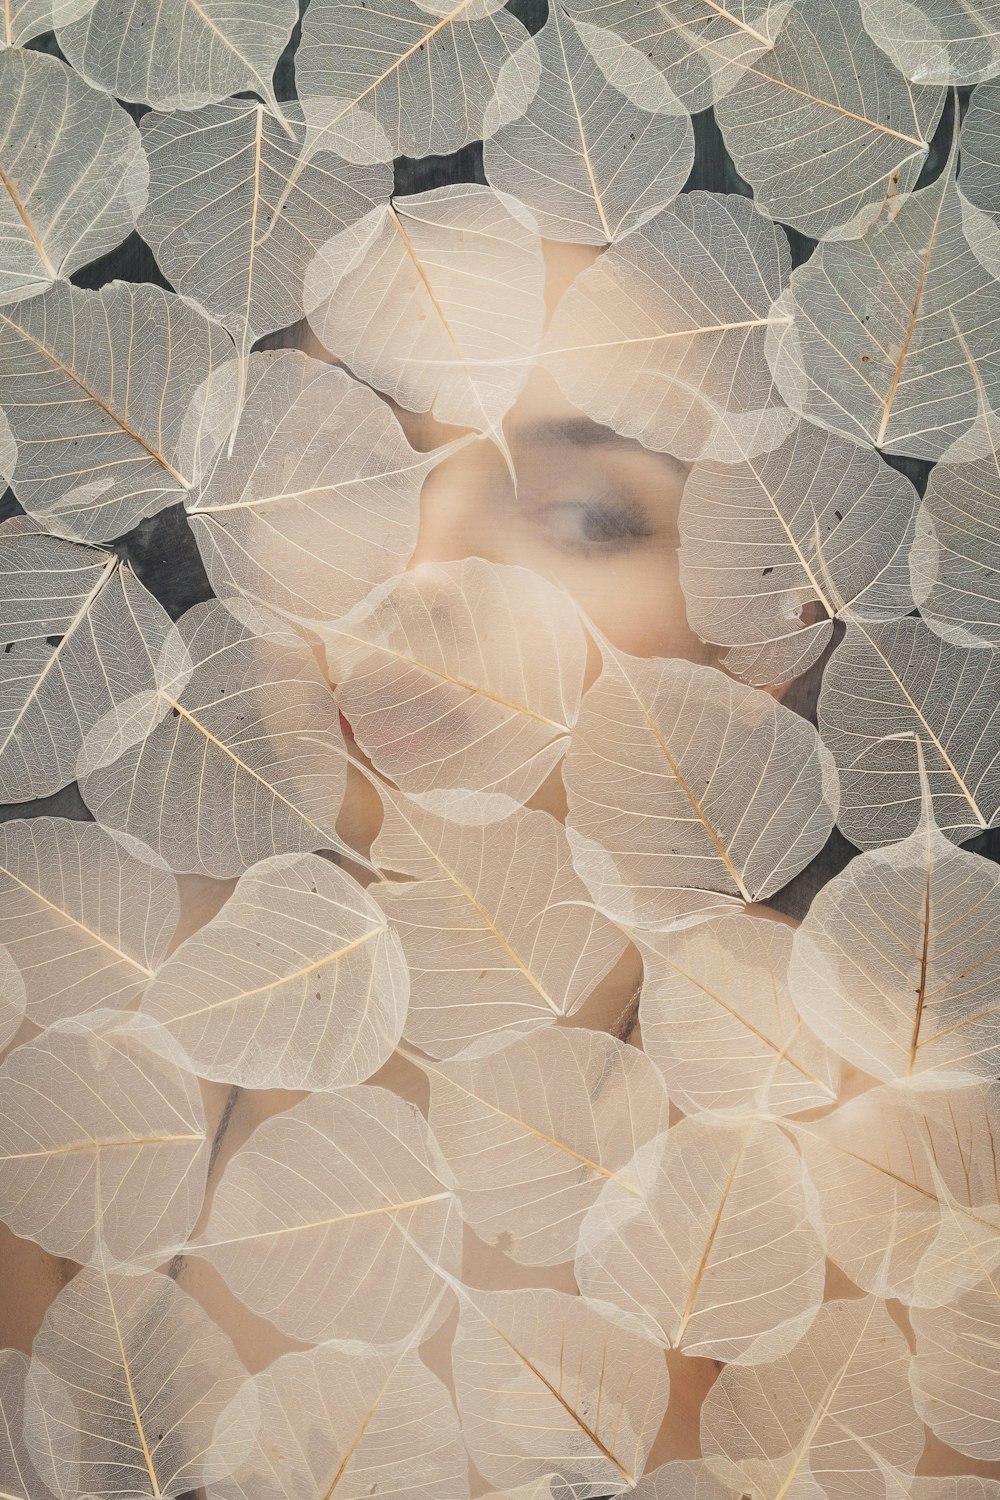 a woman's face surrounded by white leaves